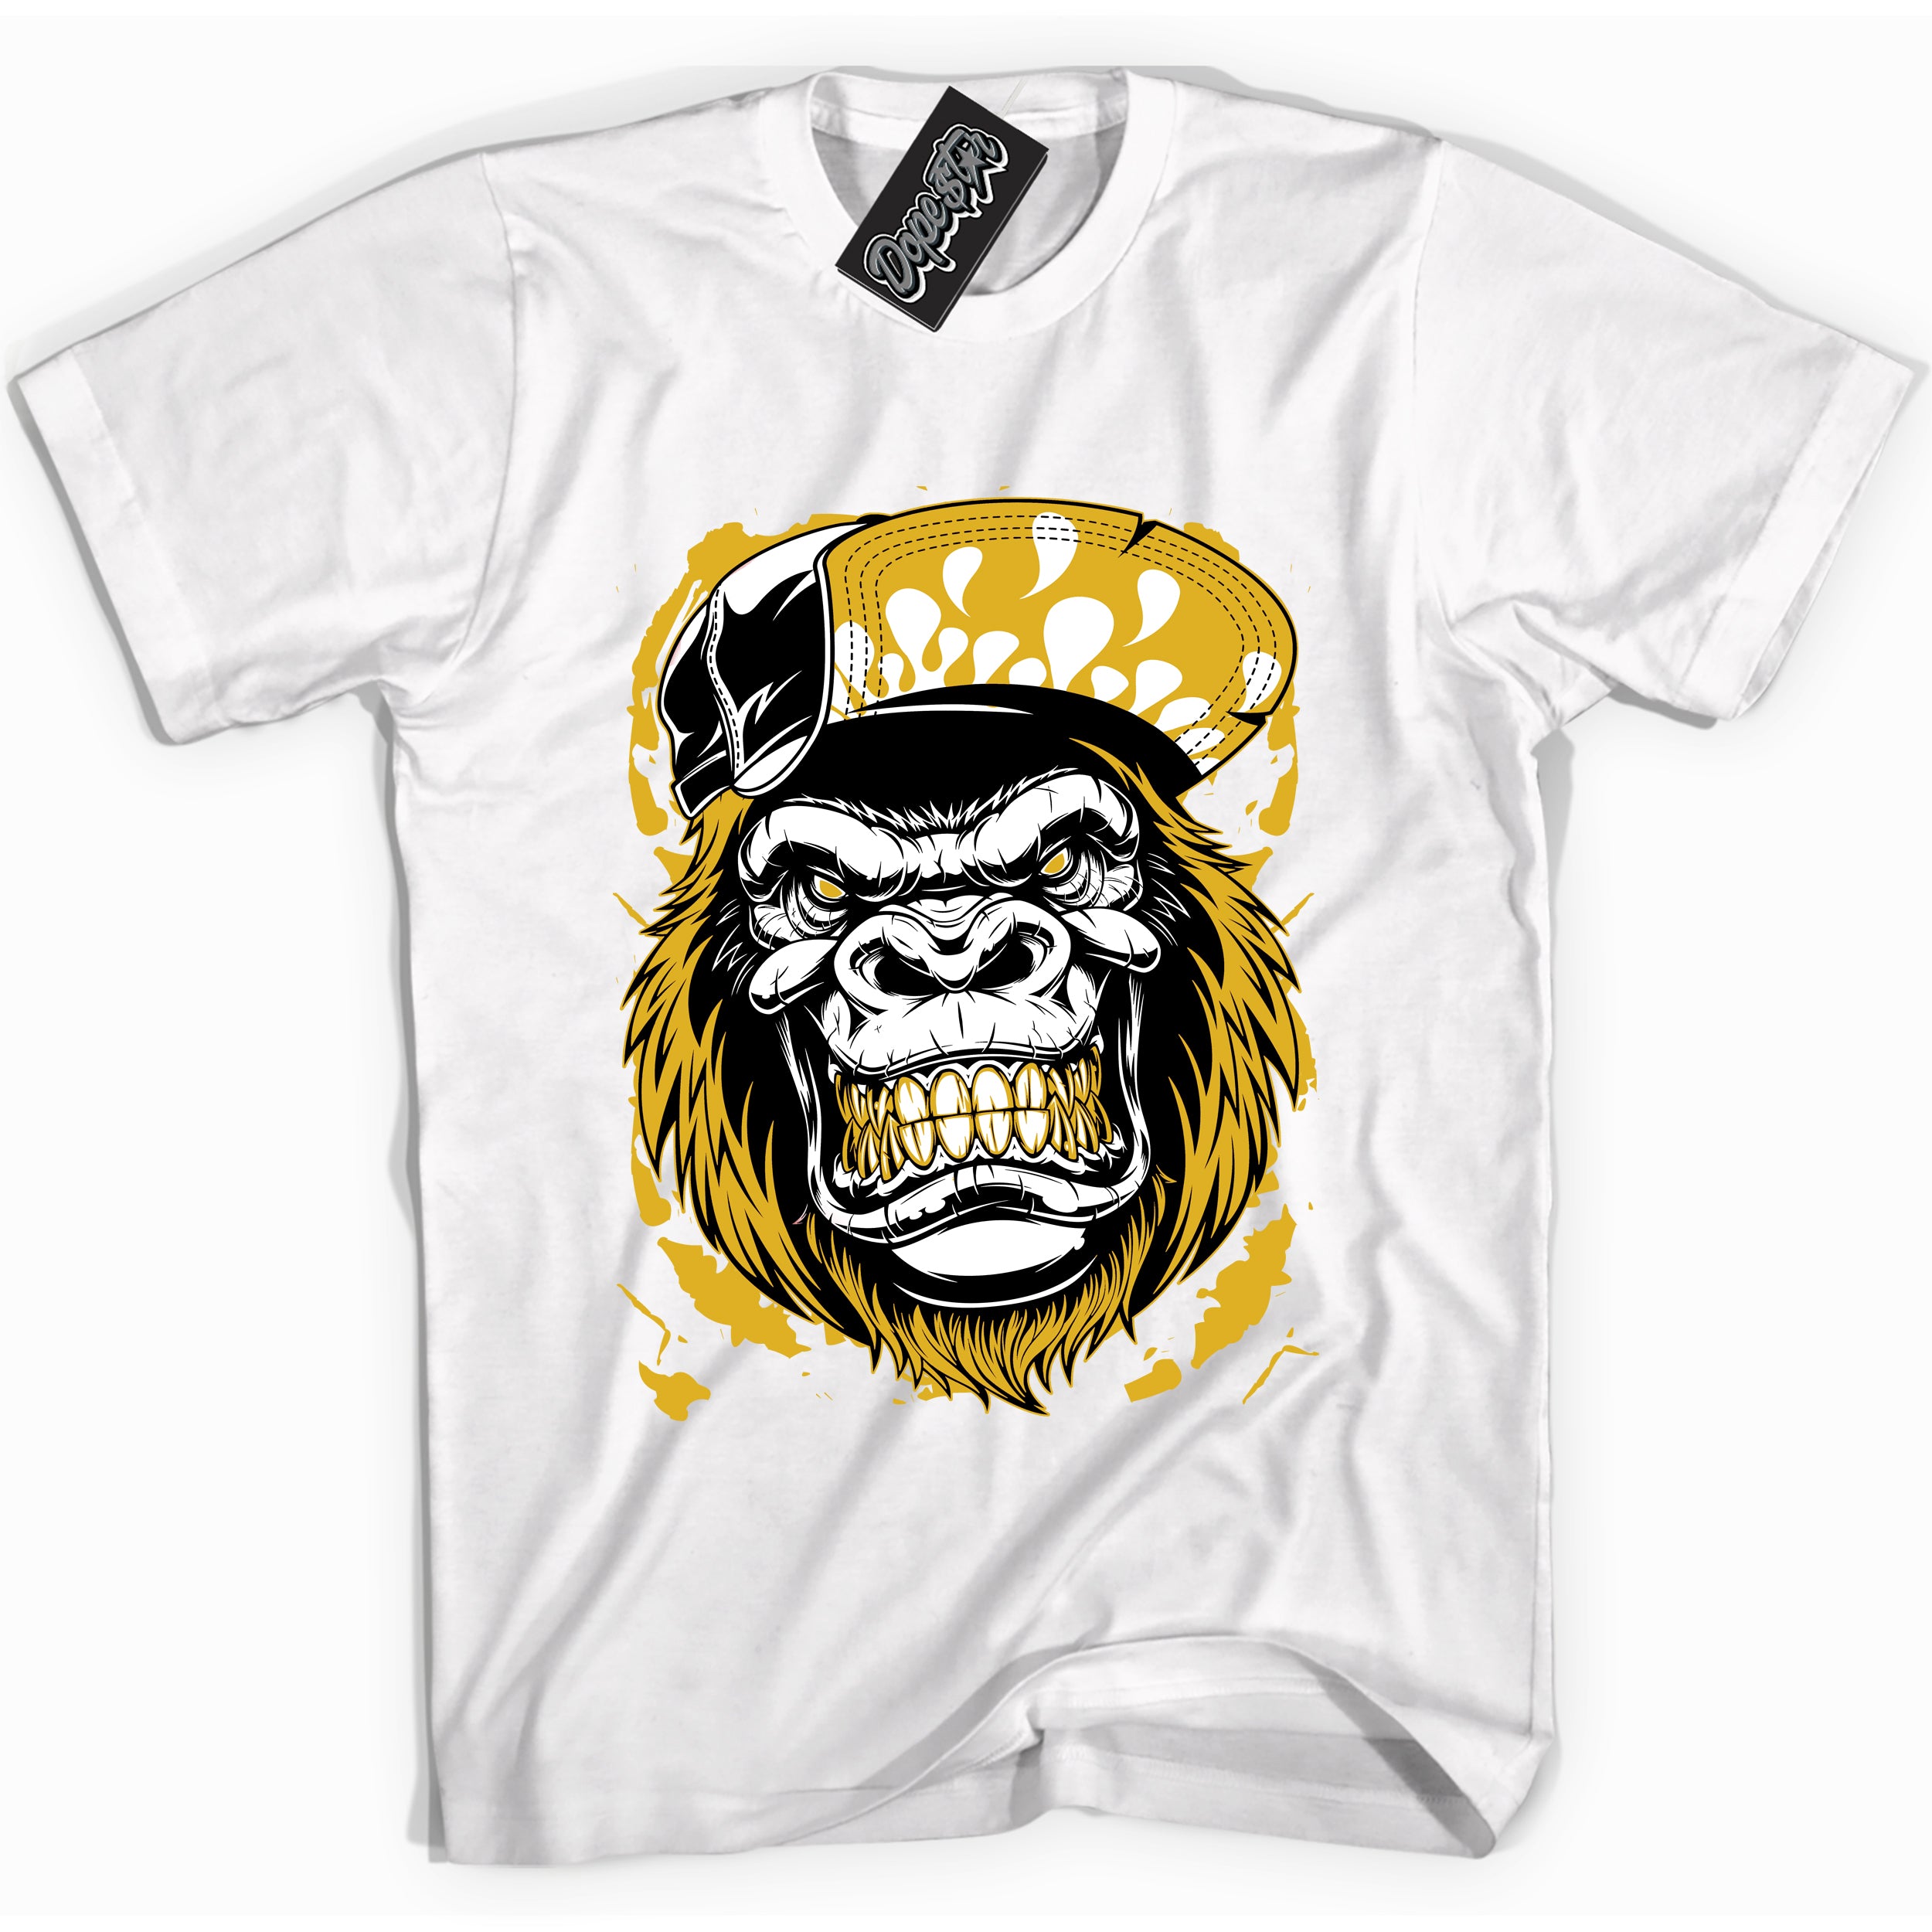 Cool White Shirt with “ Gorilla Beast” design that perfectly matches Yellow Ochre 6s Sneakers.